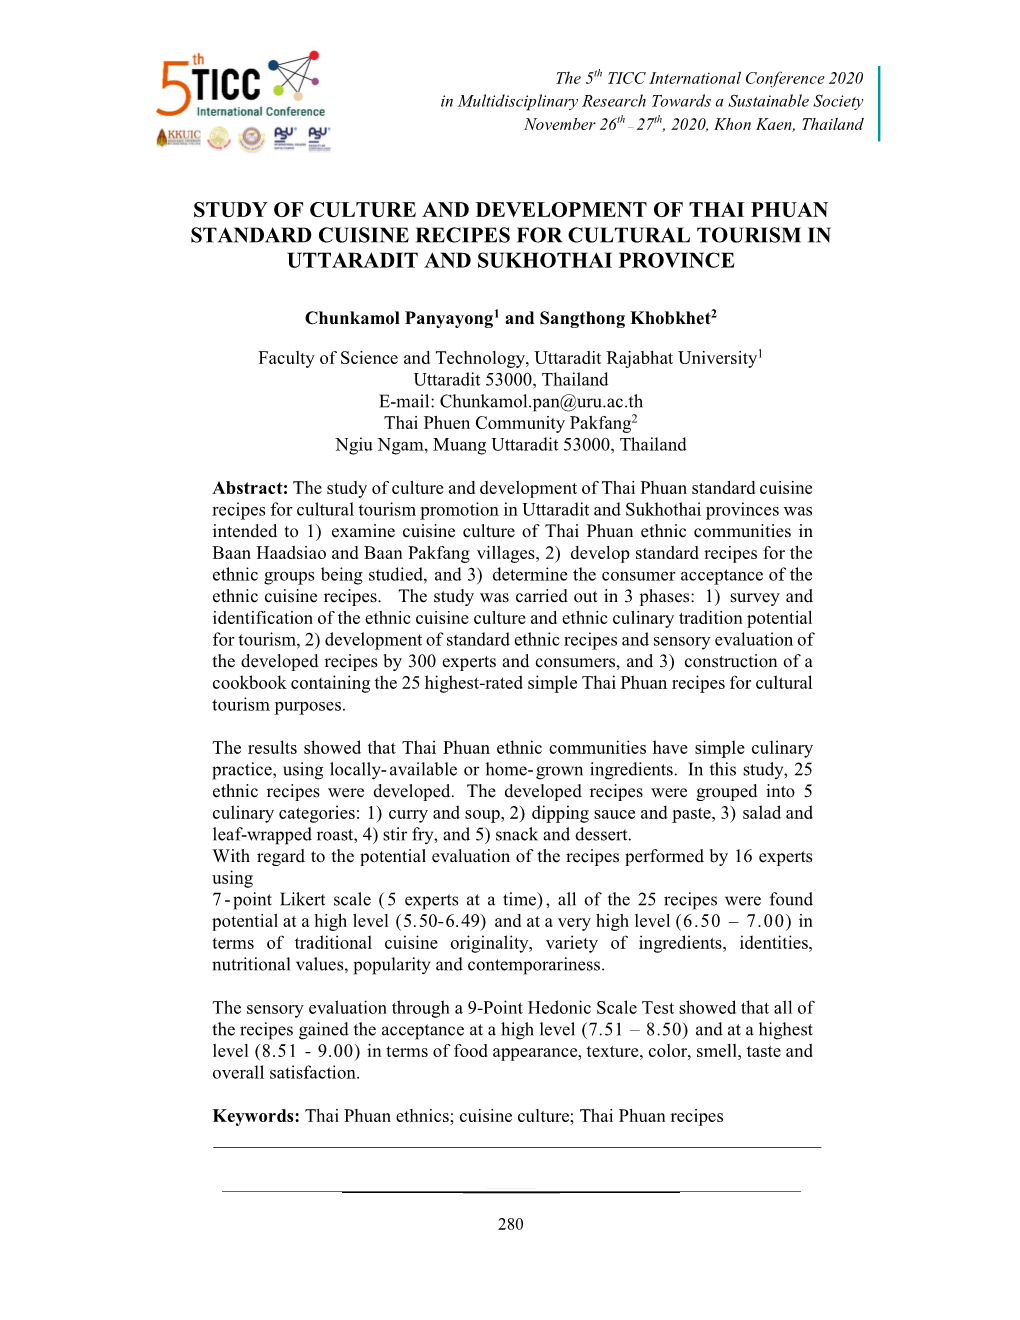 Study of Culture and Development of Thai Phuan Standard Cuisine Recipes for Cultural Tourism in Uttaradit and Sukhothai Province